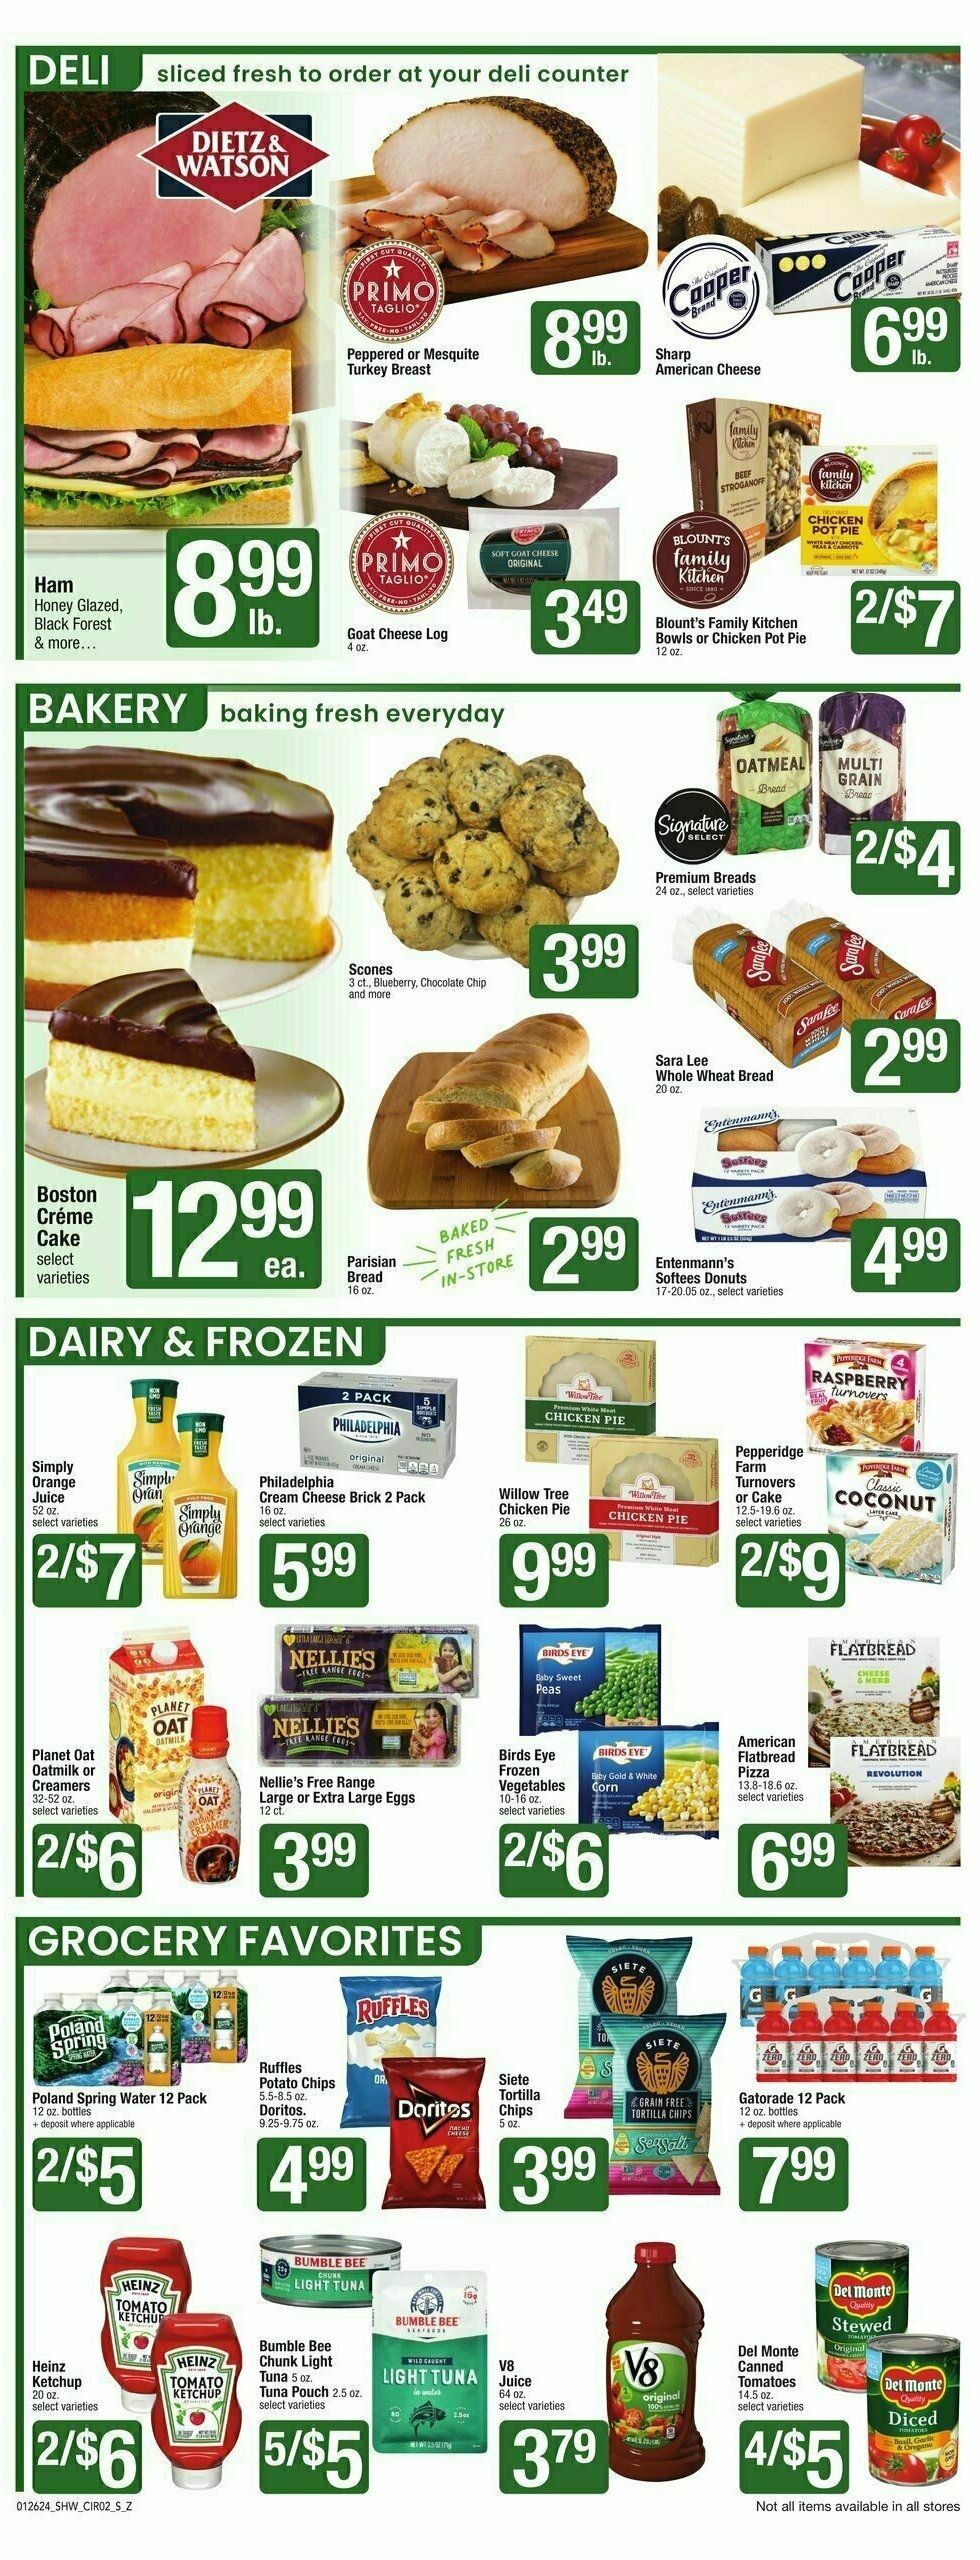 Shaw's Weekly Ad from January 26